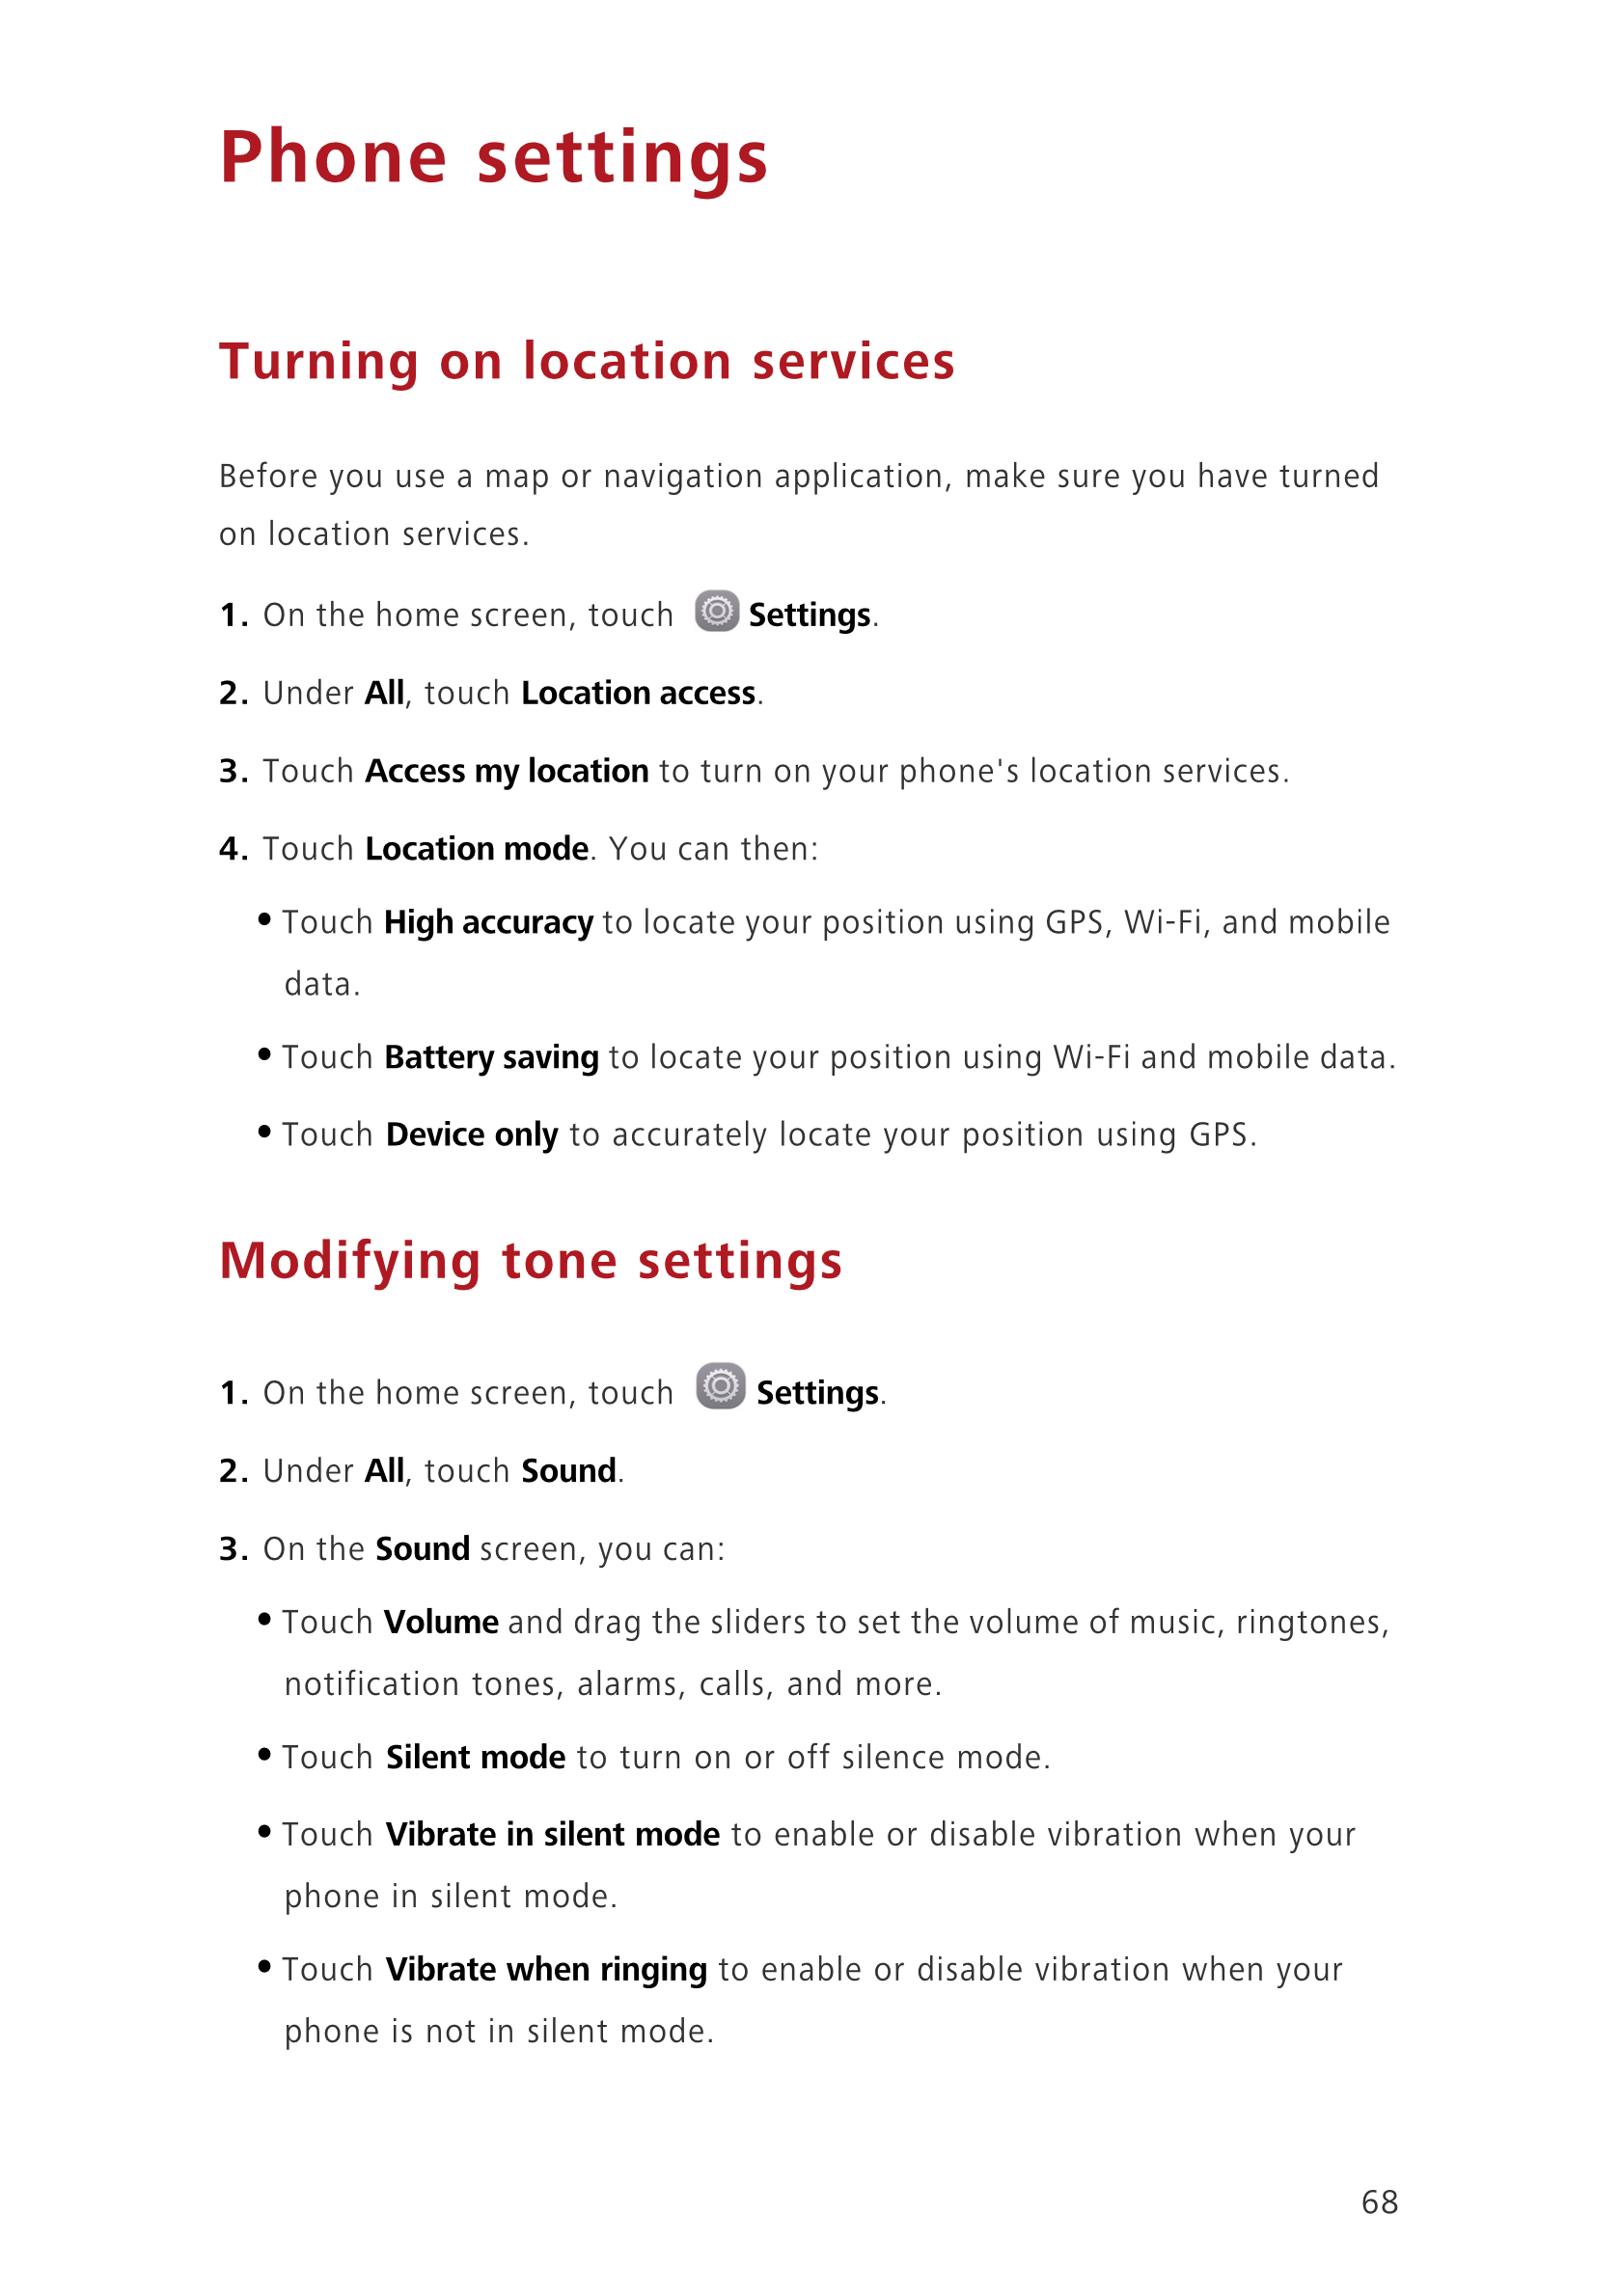 Phone settings
Turning on location services
Before you use a map or navigation application, make sure you have turned 
on locati